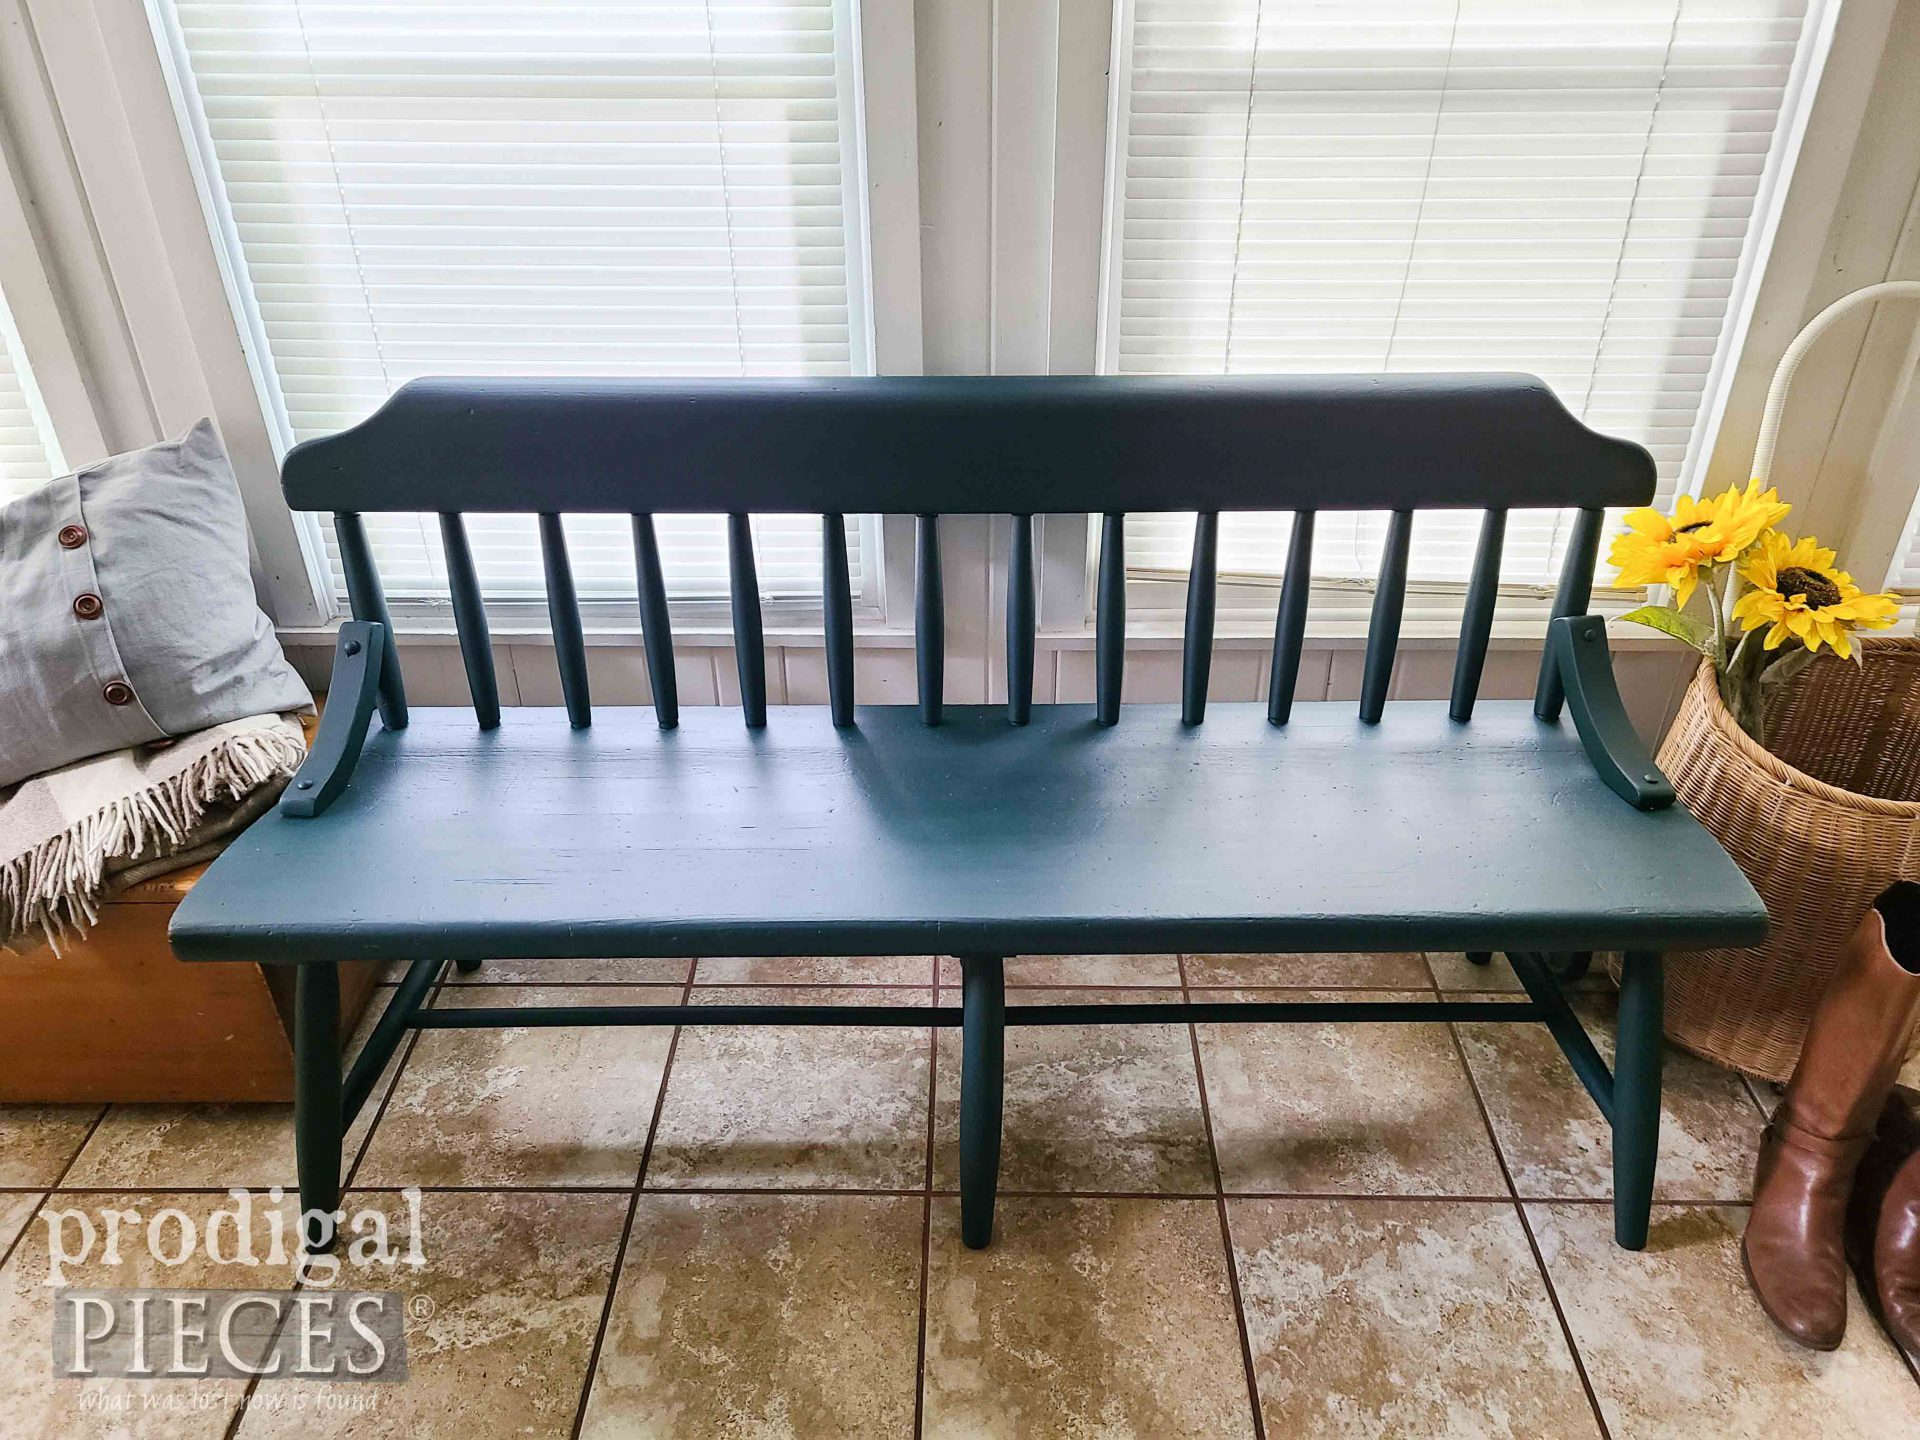 Painted Green Farmhouse Bench Makeover by Larissa of Prodigal Pieces | prodigalpieces.com #prodigalpieces #diy #green #furniture